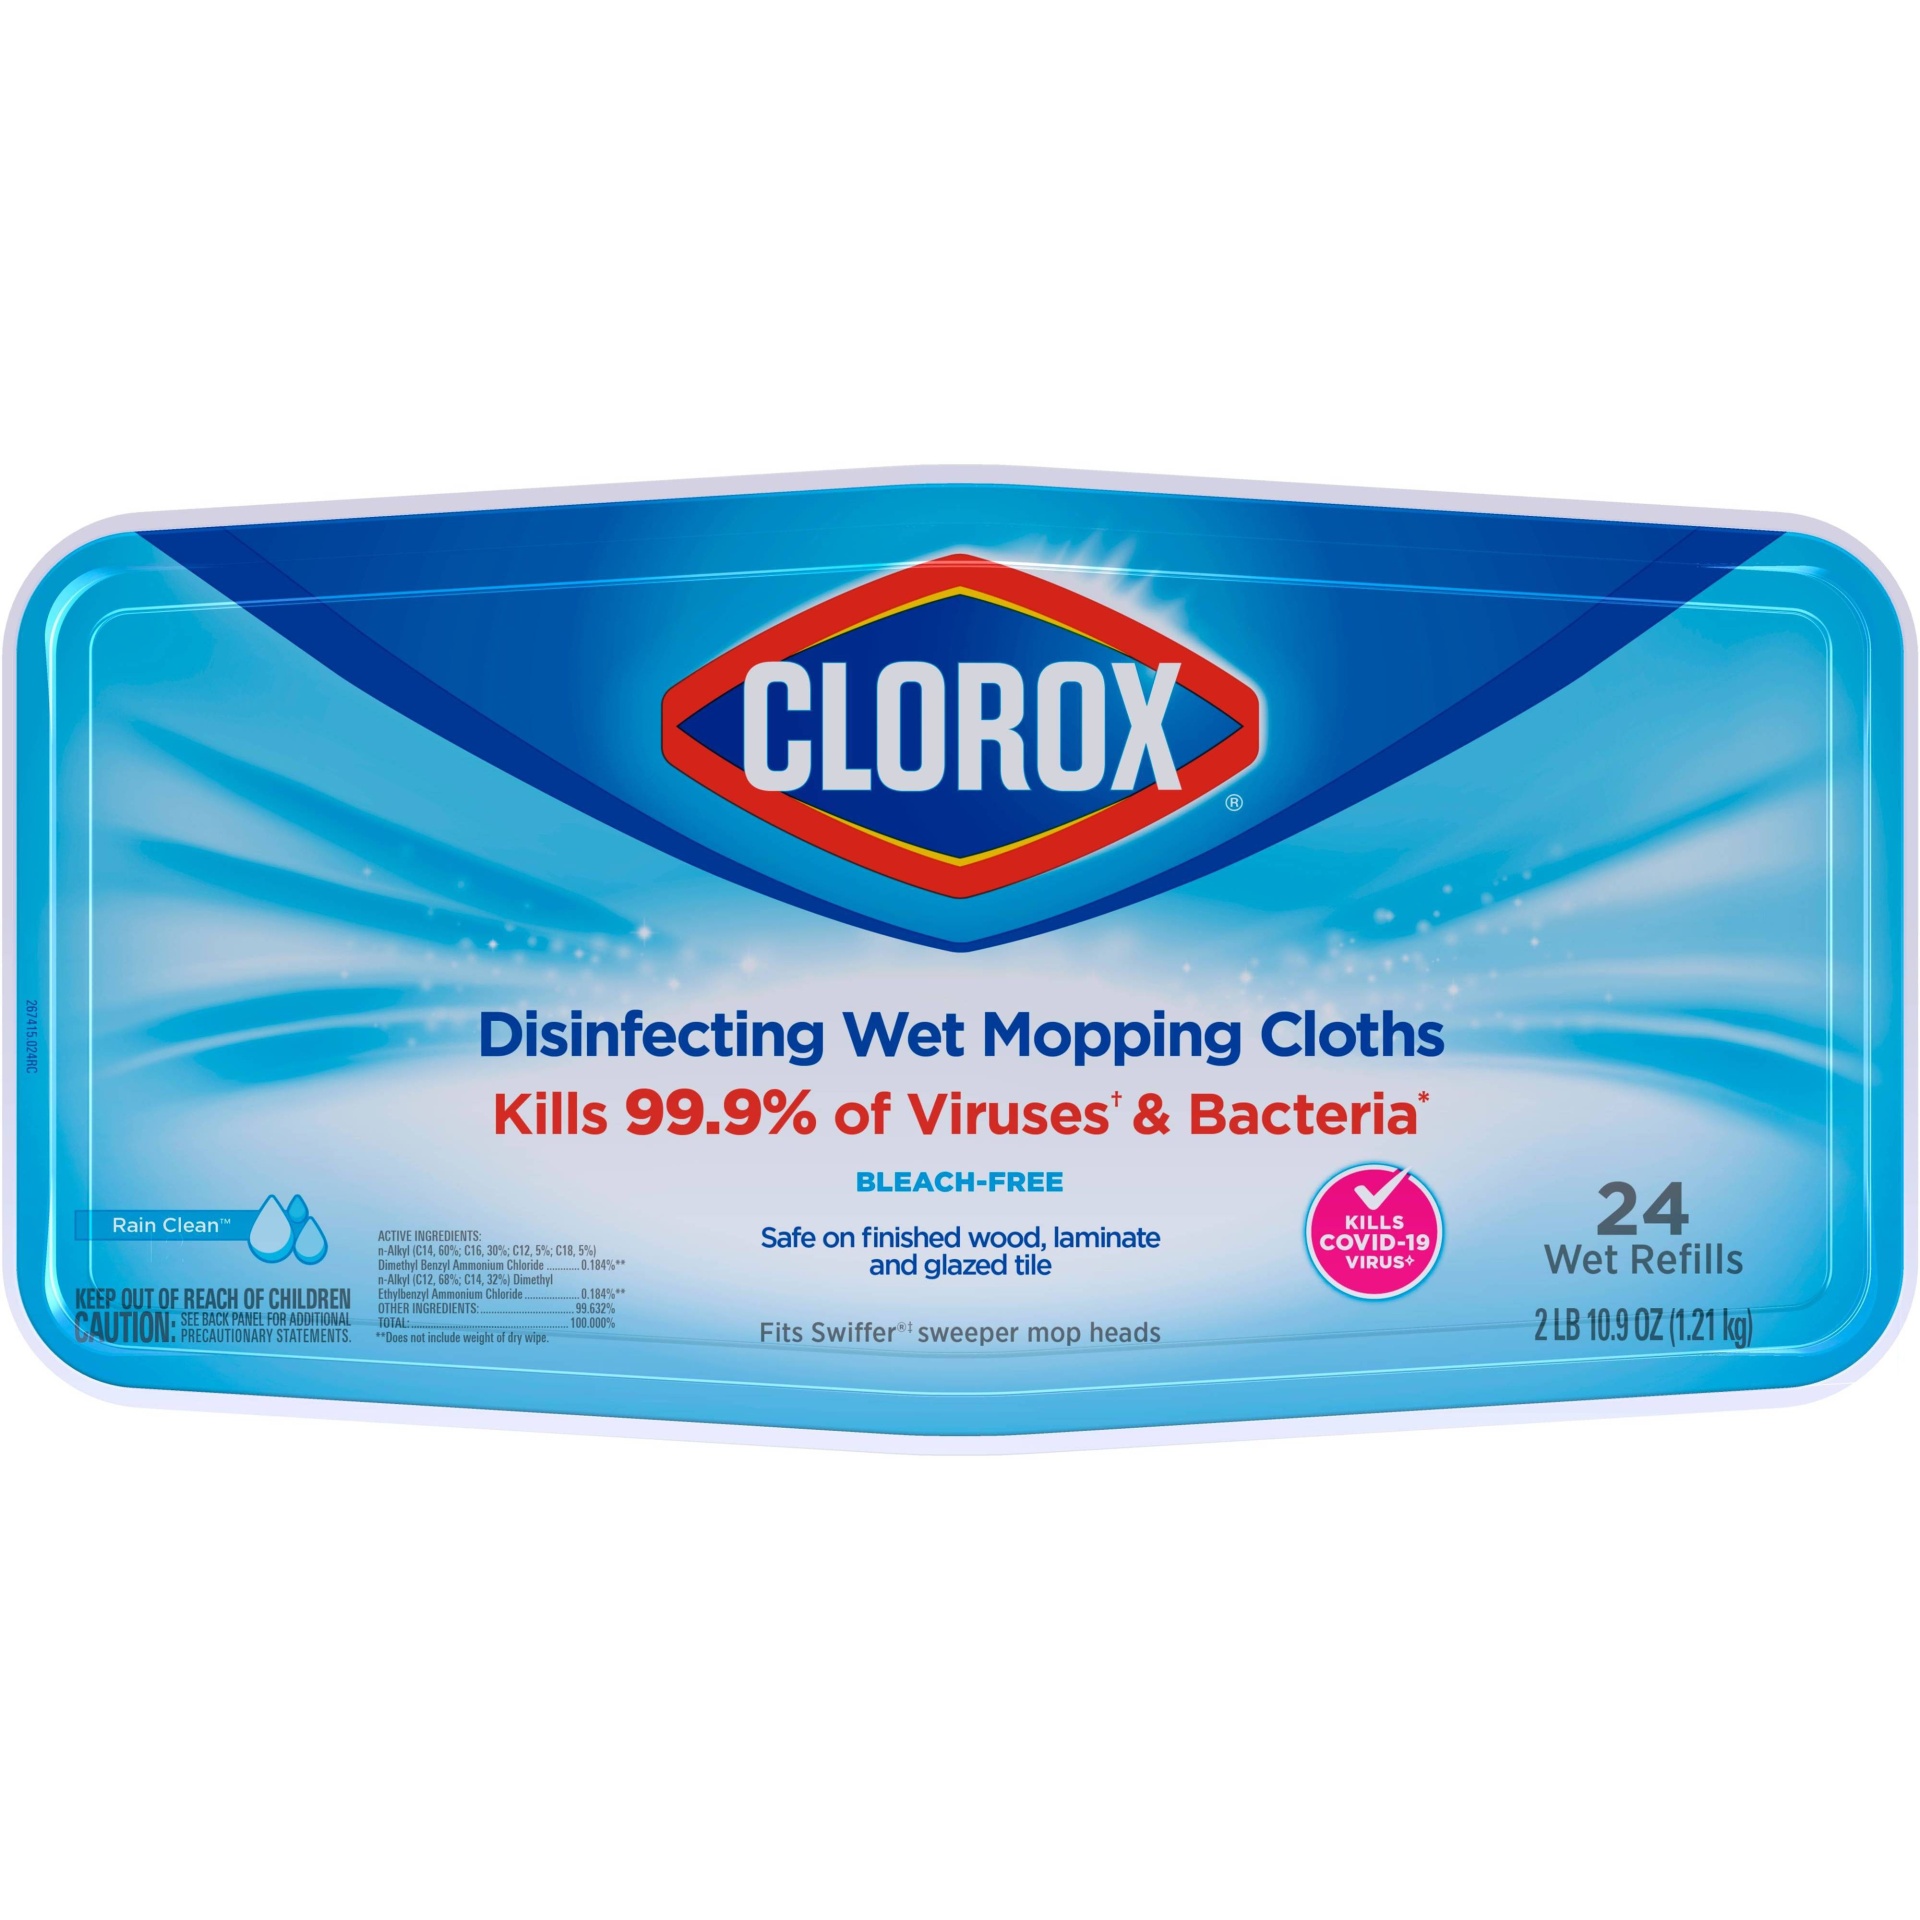 slide 1 of 29, Clorox Rain Clean Scent Bleach Free Disinfecting Wet Mopping Pad Refills, 24 ct